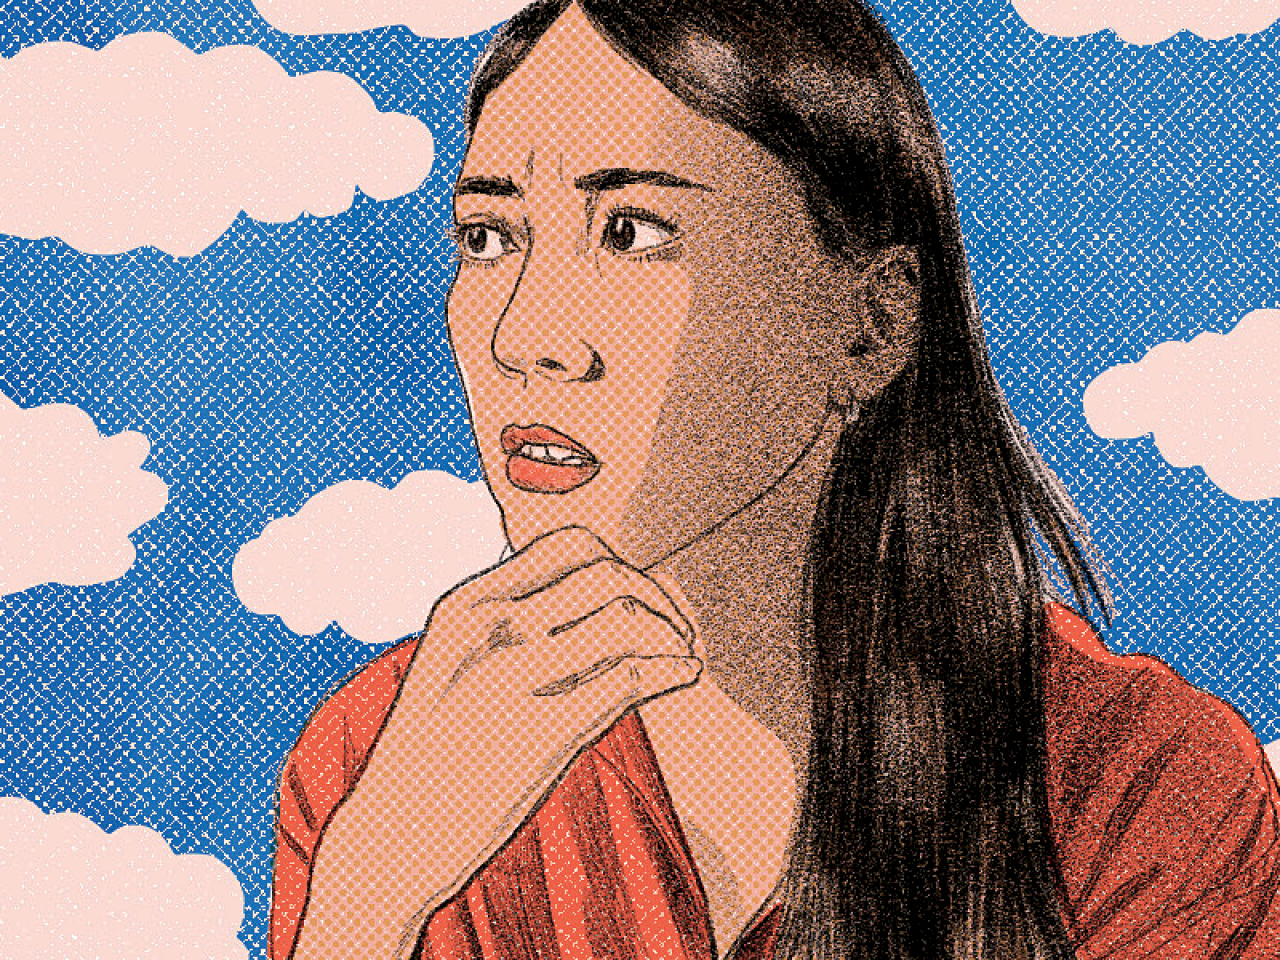 Illustration of a woman looking off to her right, with her right hand resting on her chin. She is surrounded by clouds, representing brain fog during menopause.